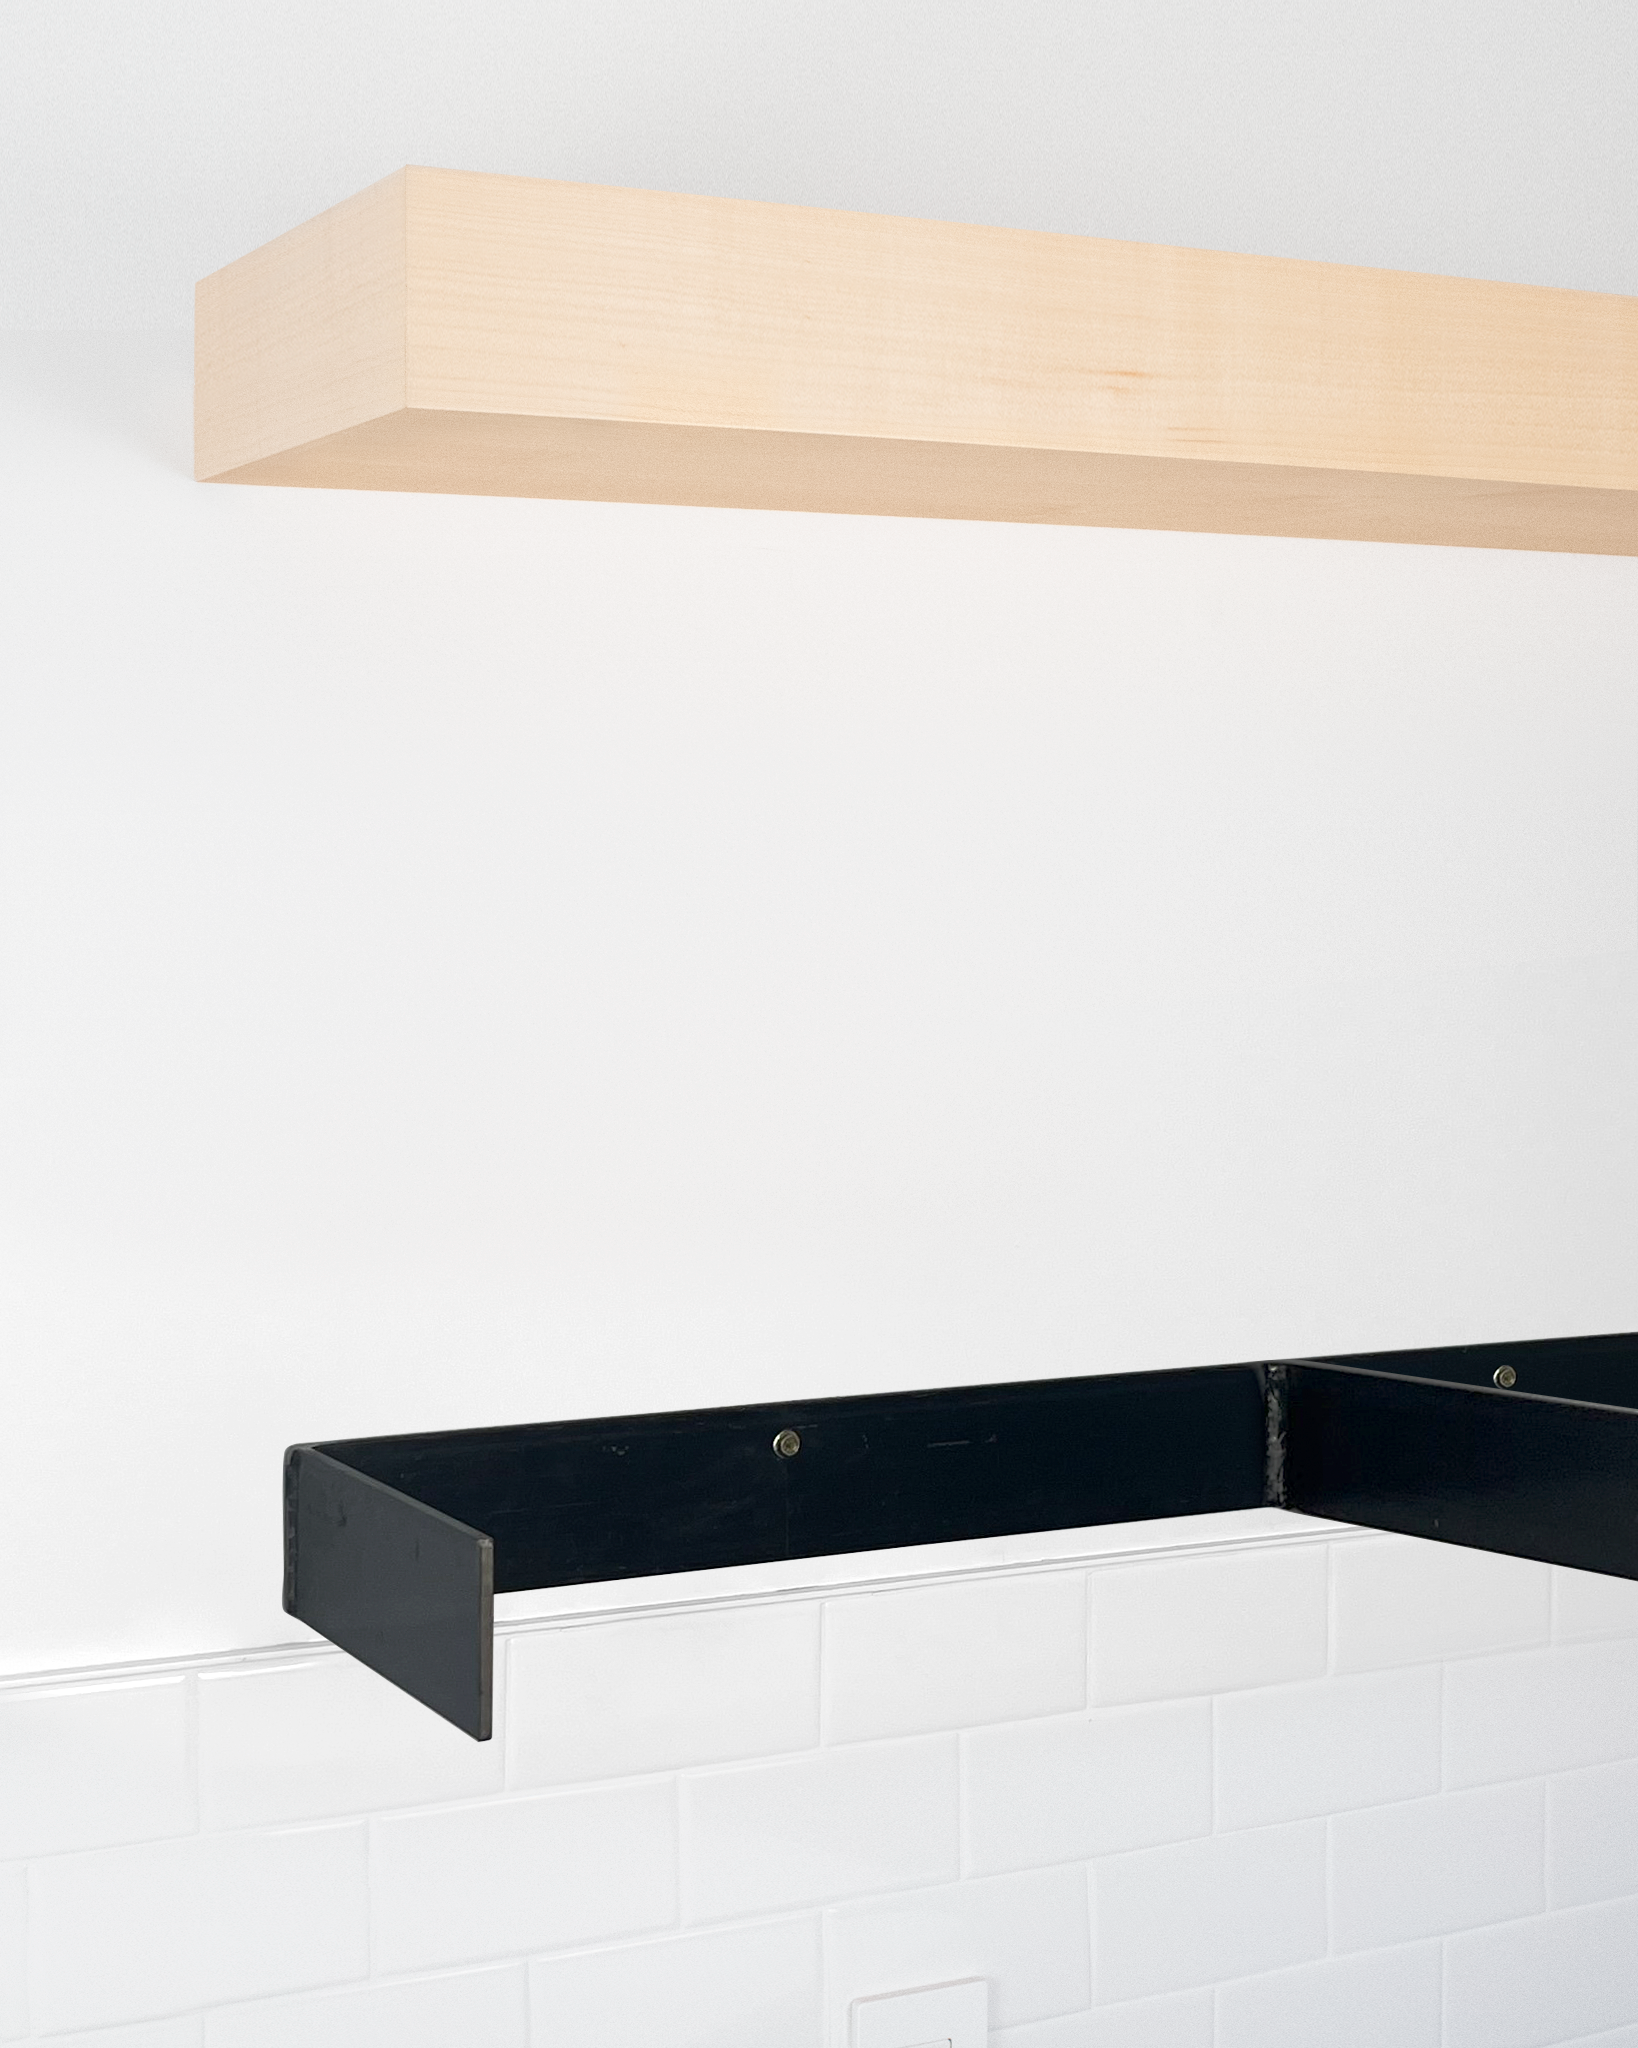 Maple Floating Shelves 2-4" thick